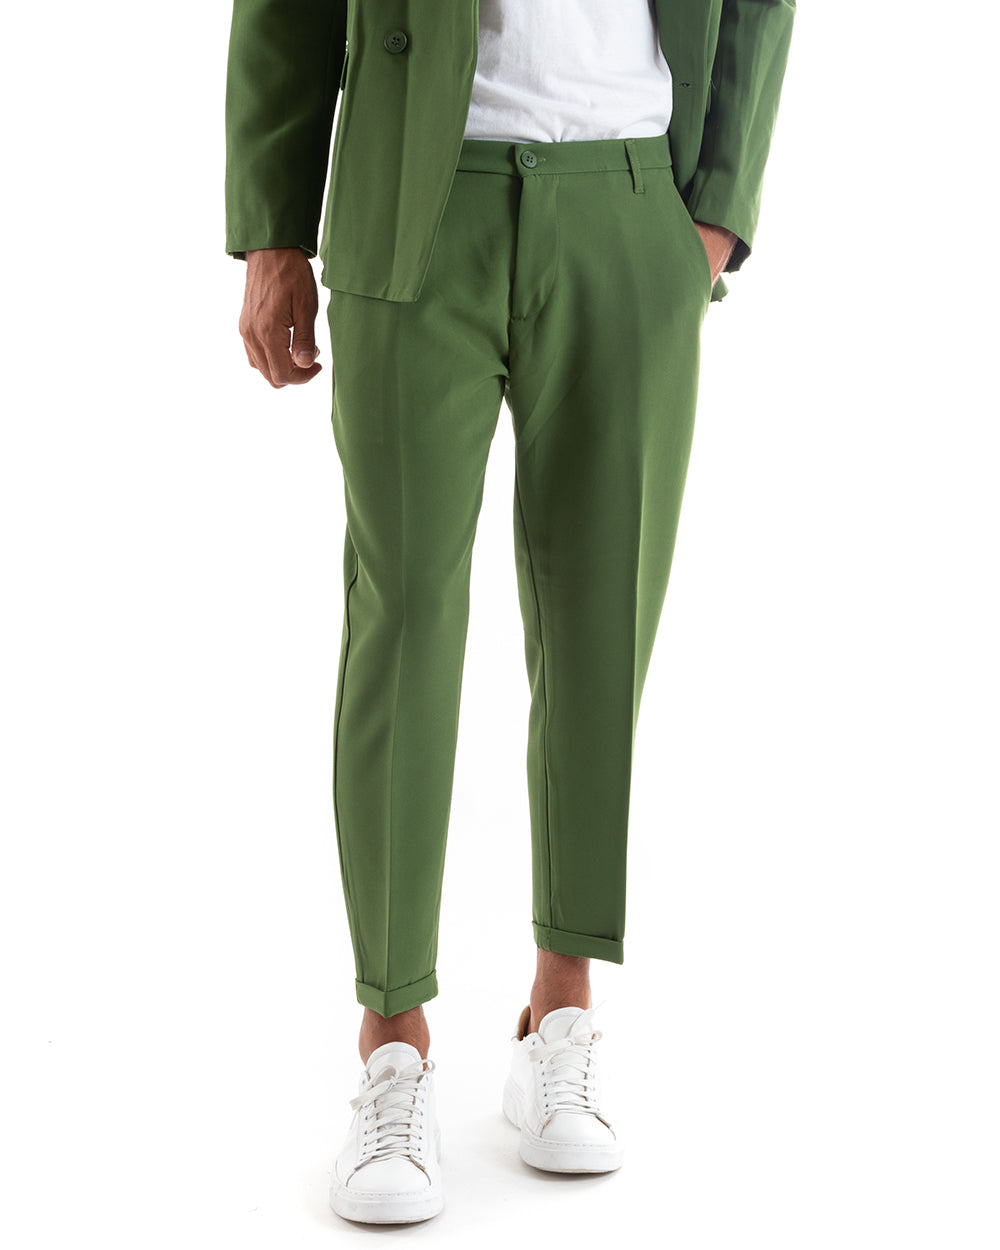 Double-Breasted Men's Suit Viscose Suit Suit Jacket Trousers Green Elegant Ceremony GIOSAL-OU2166A